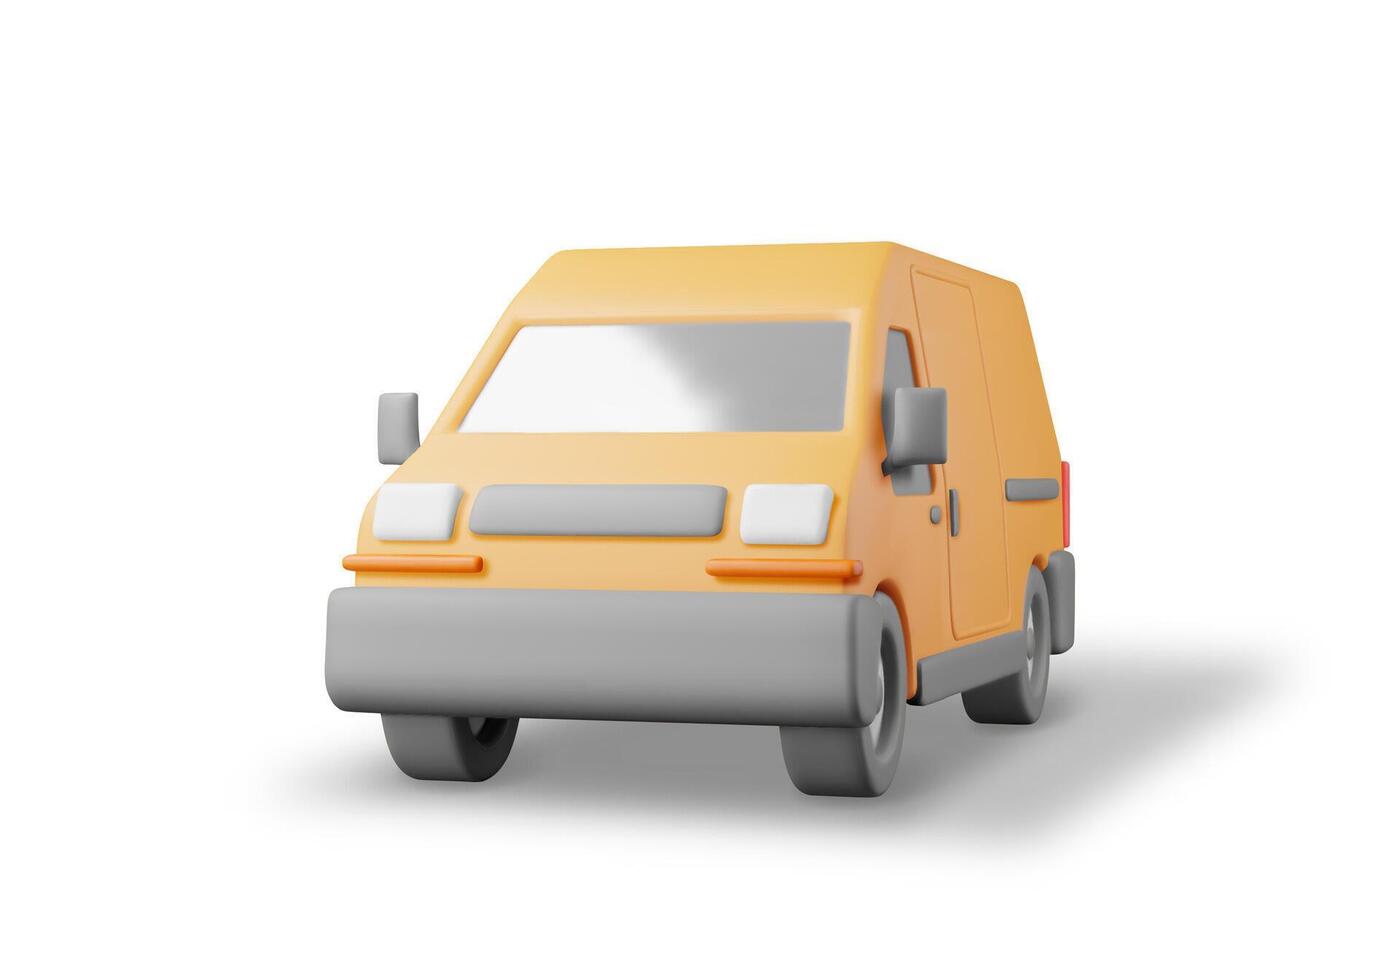 3D Delivery Van Car Isolated on White. Render Express Delivering Services Commercial Truck. Concept of Fast and Free Delivery by Car. Cargo and Logistic. Cartoon Vector Illustration